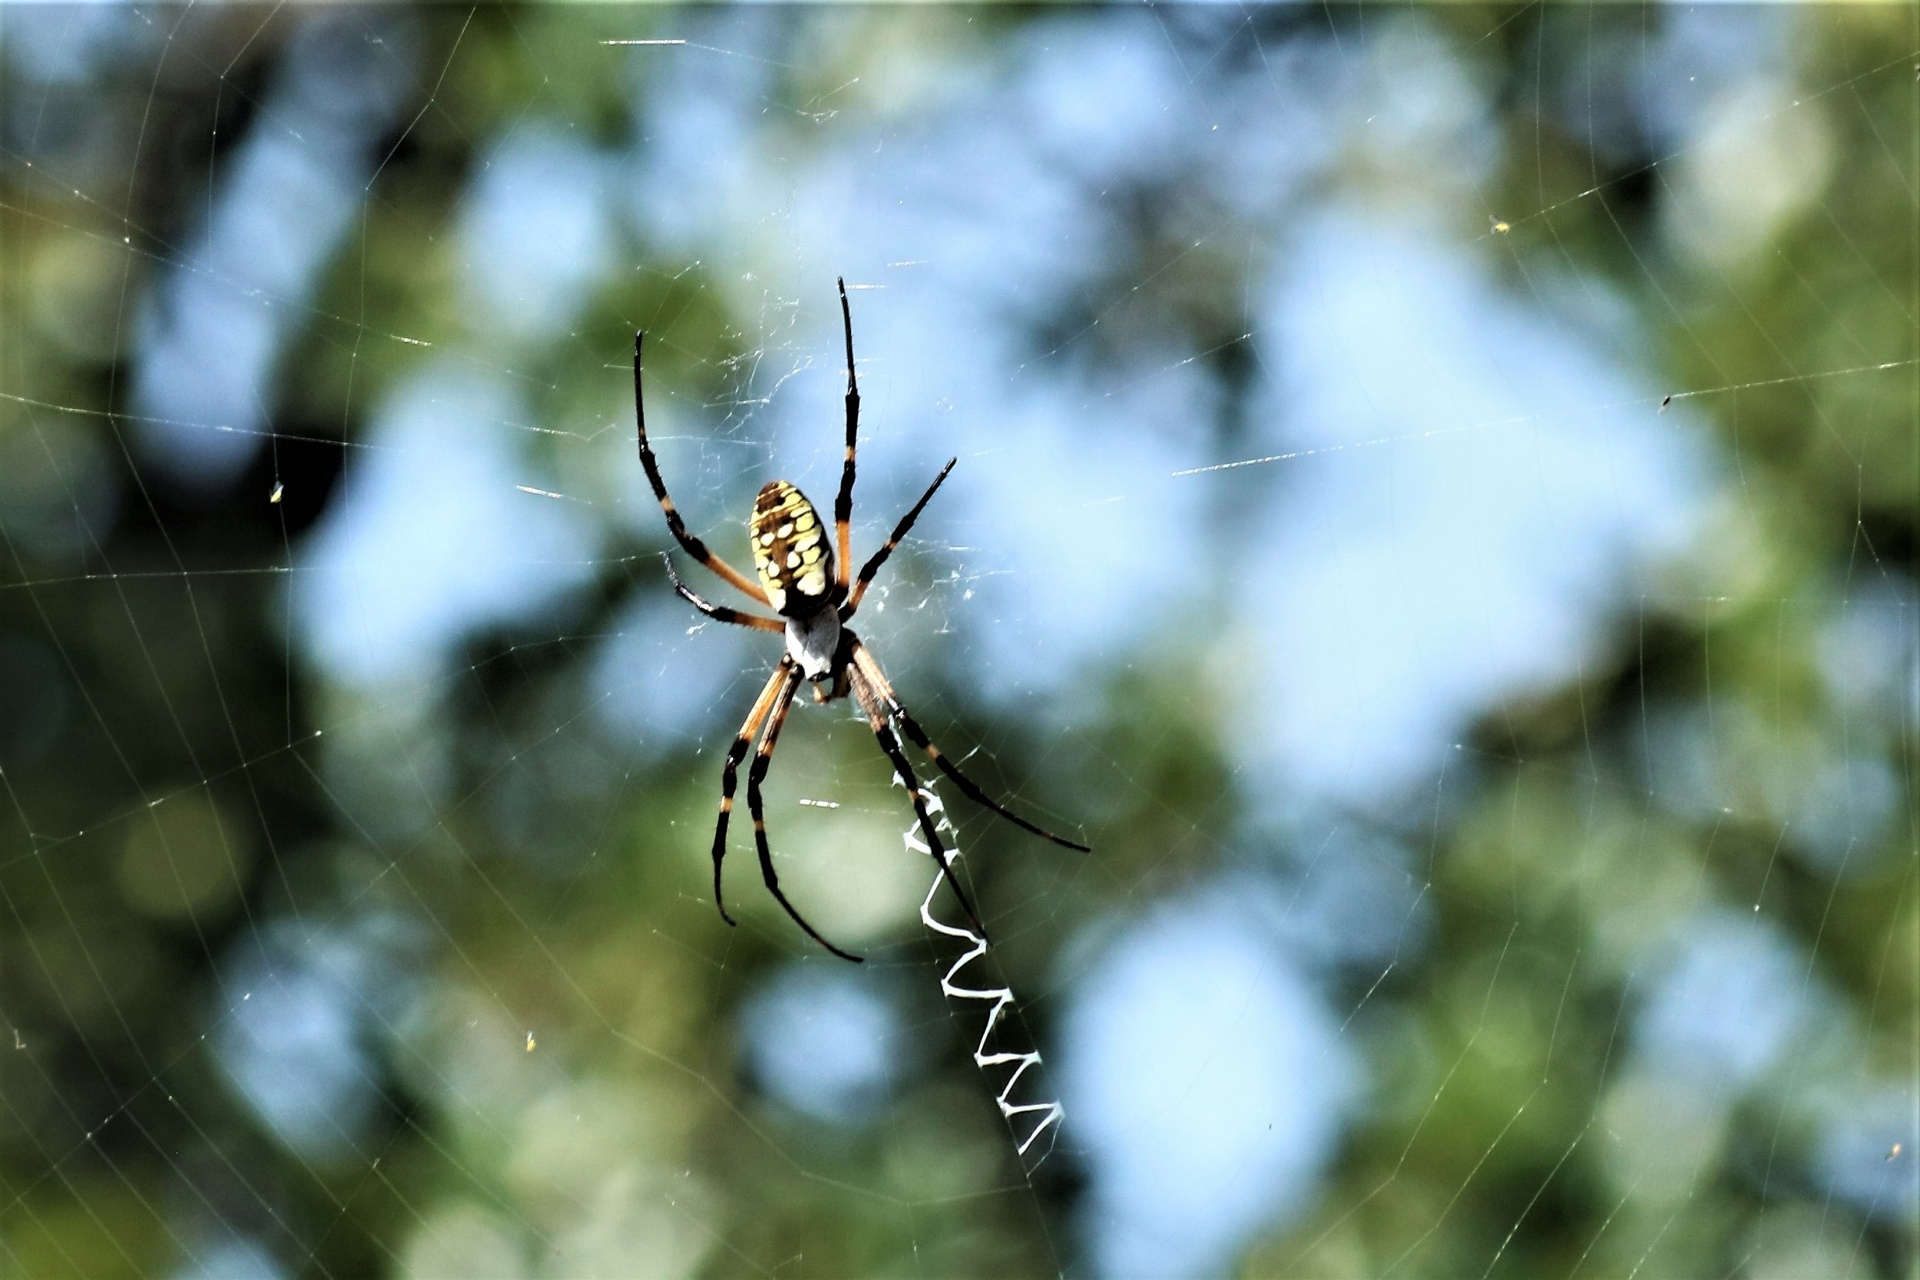 A yellow garden spider, clinging to the center of his web, on a blurred green and blue background.